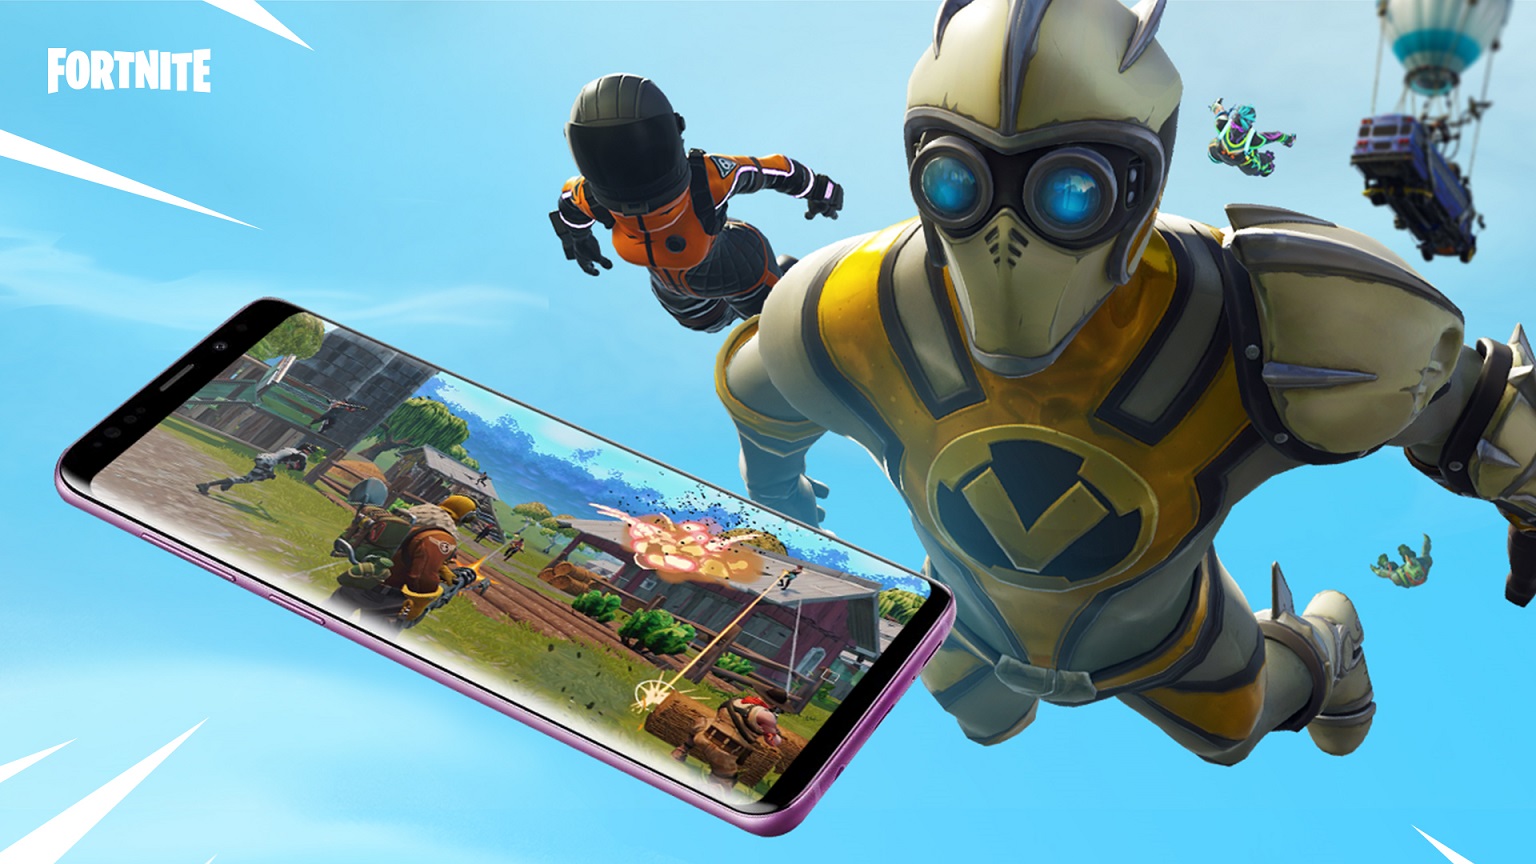 Fortnite Is Now Available On Samsung Galaxy Phones Engadget - roblox fortnite battle royale beta